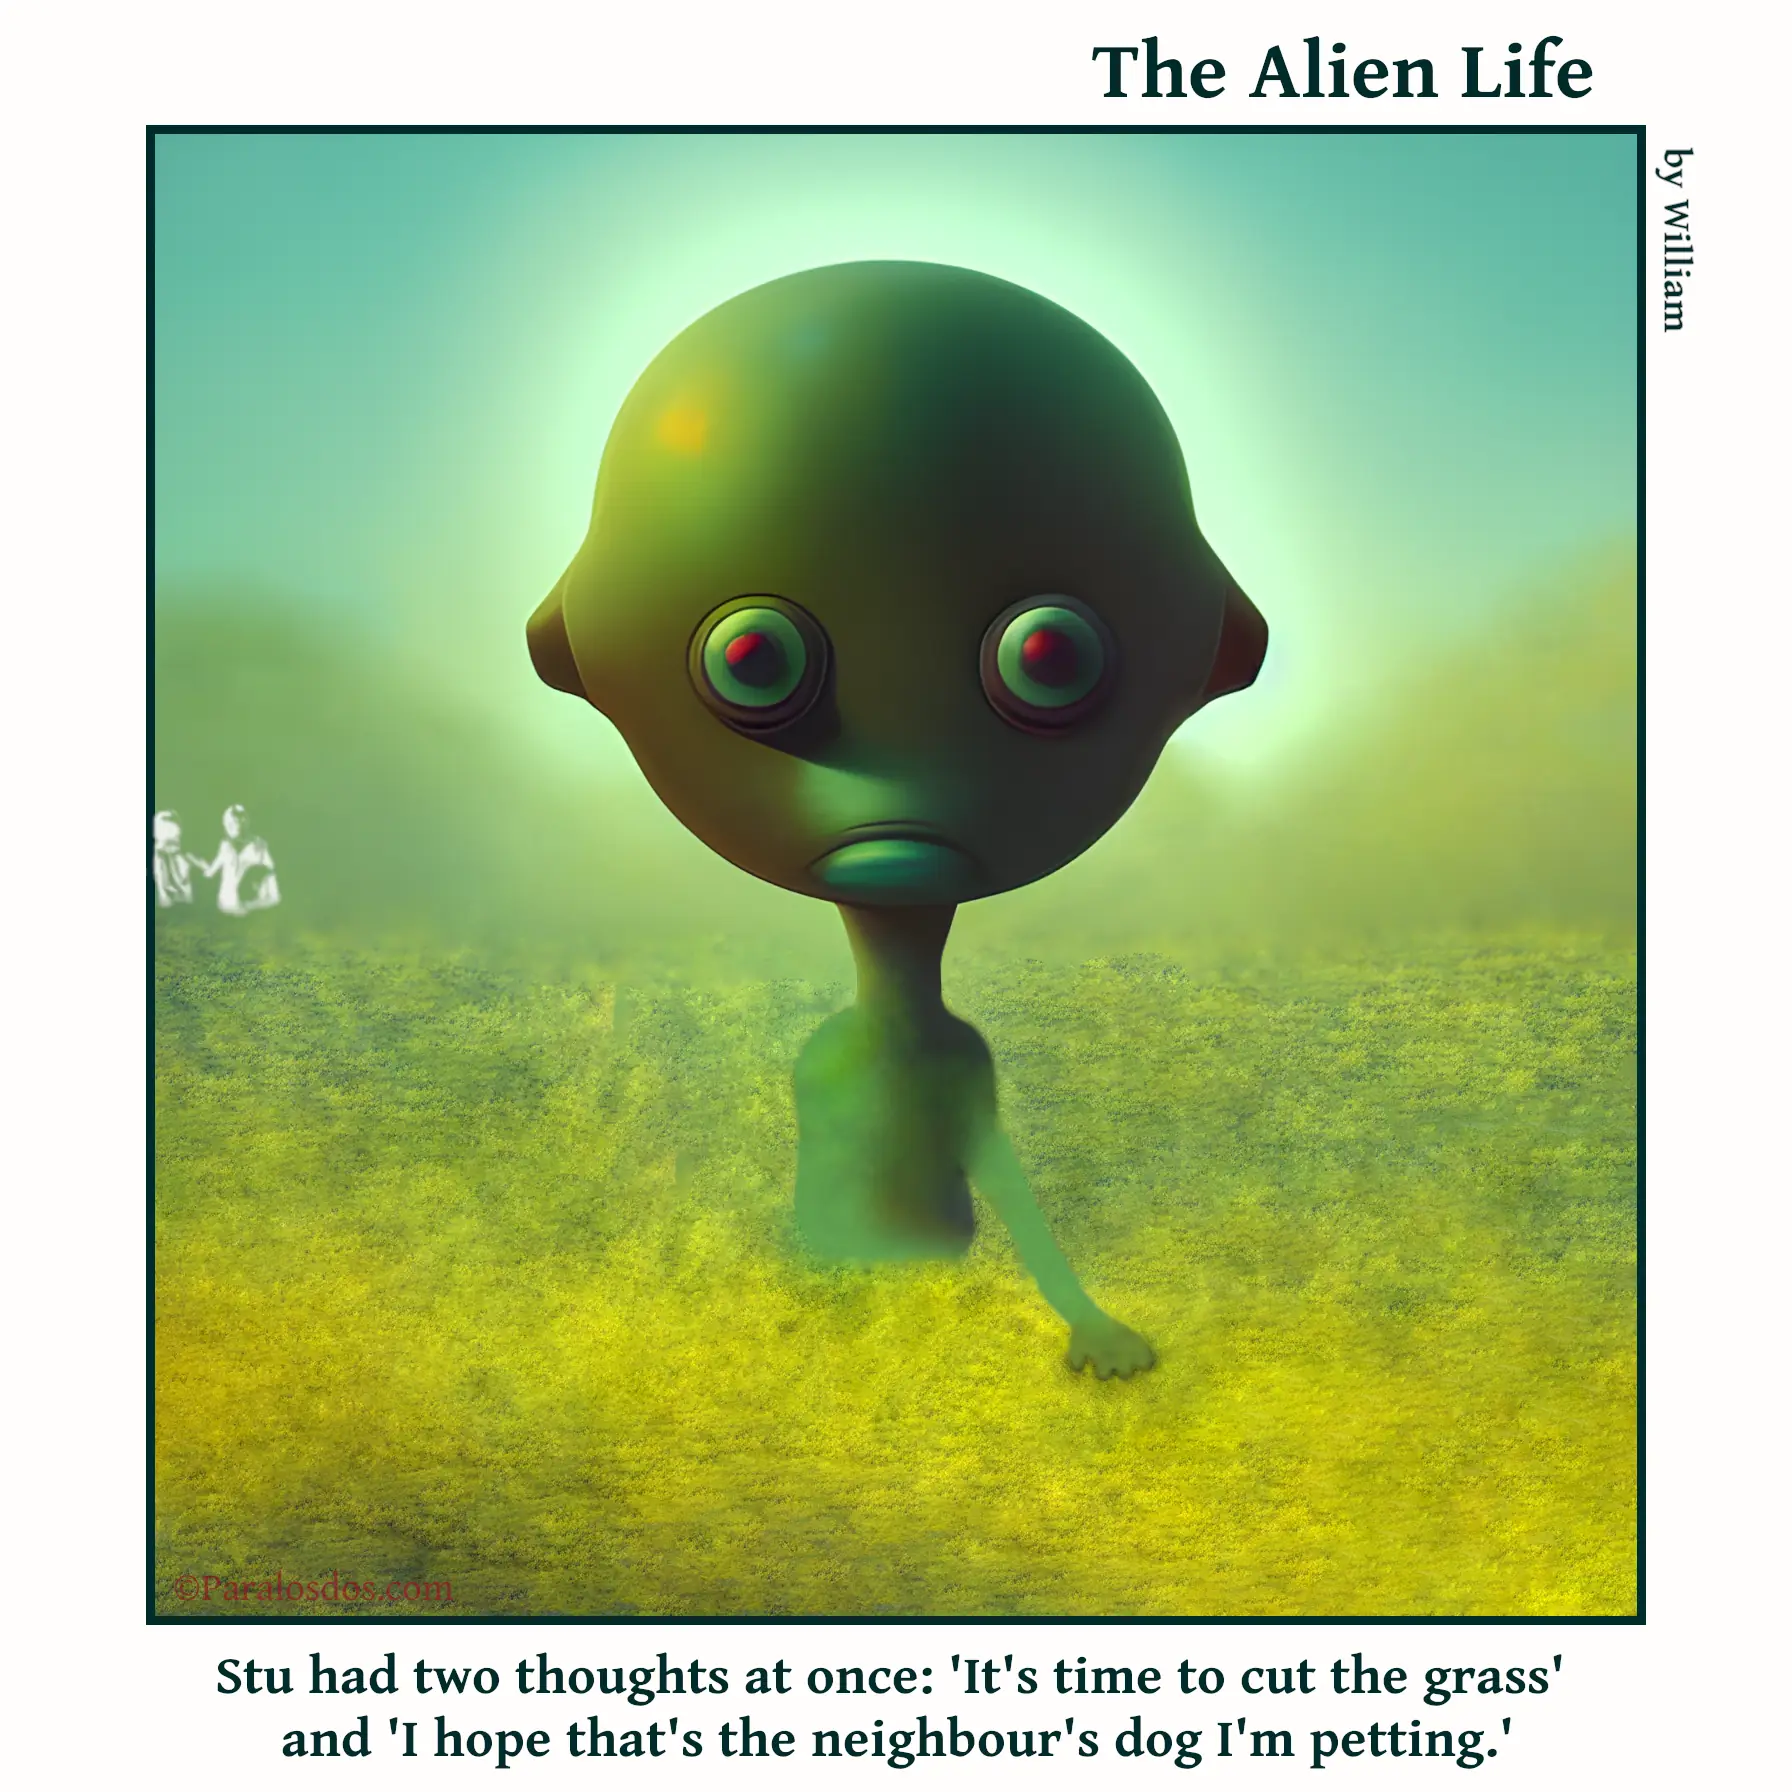 The Alien Life, one panel Comic. An alien is standing in grass up to his waist, and one hand is in the grass. The caption reads: Stu had two thoughts at once: 'It's time to cut the grass' and 'I hope that's the neighbour's dog I'm petting.'